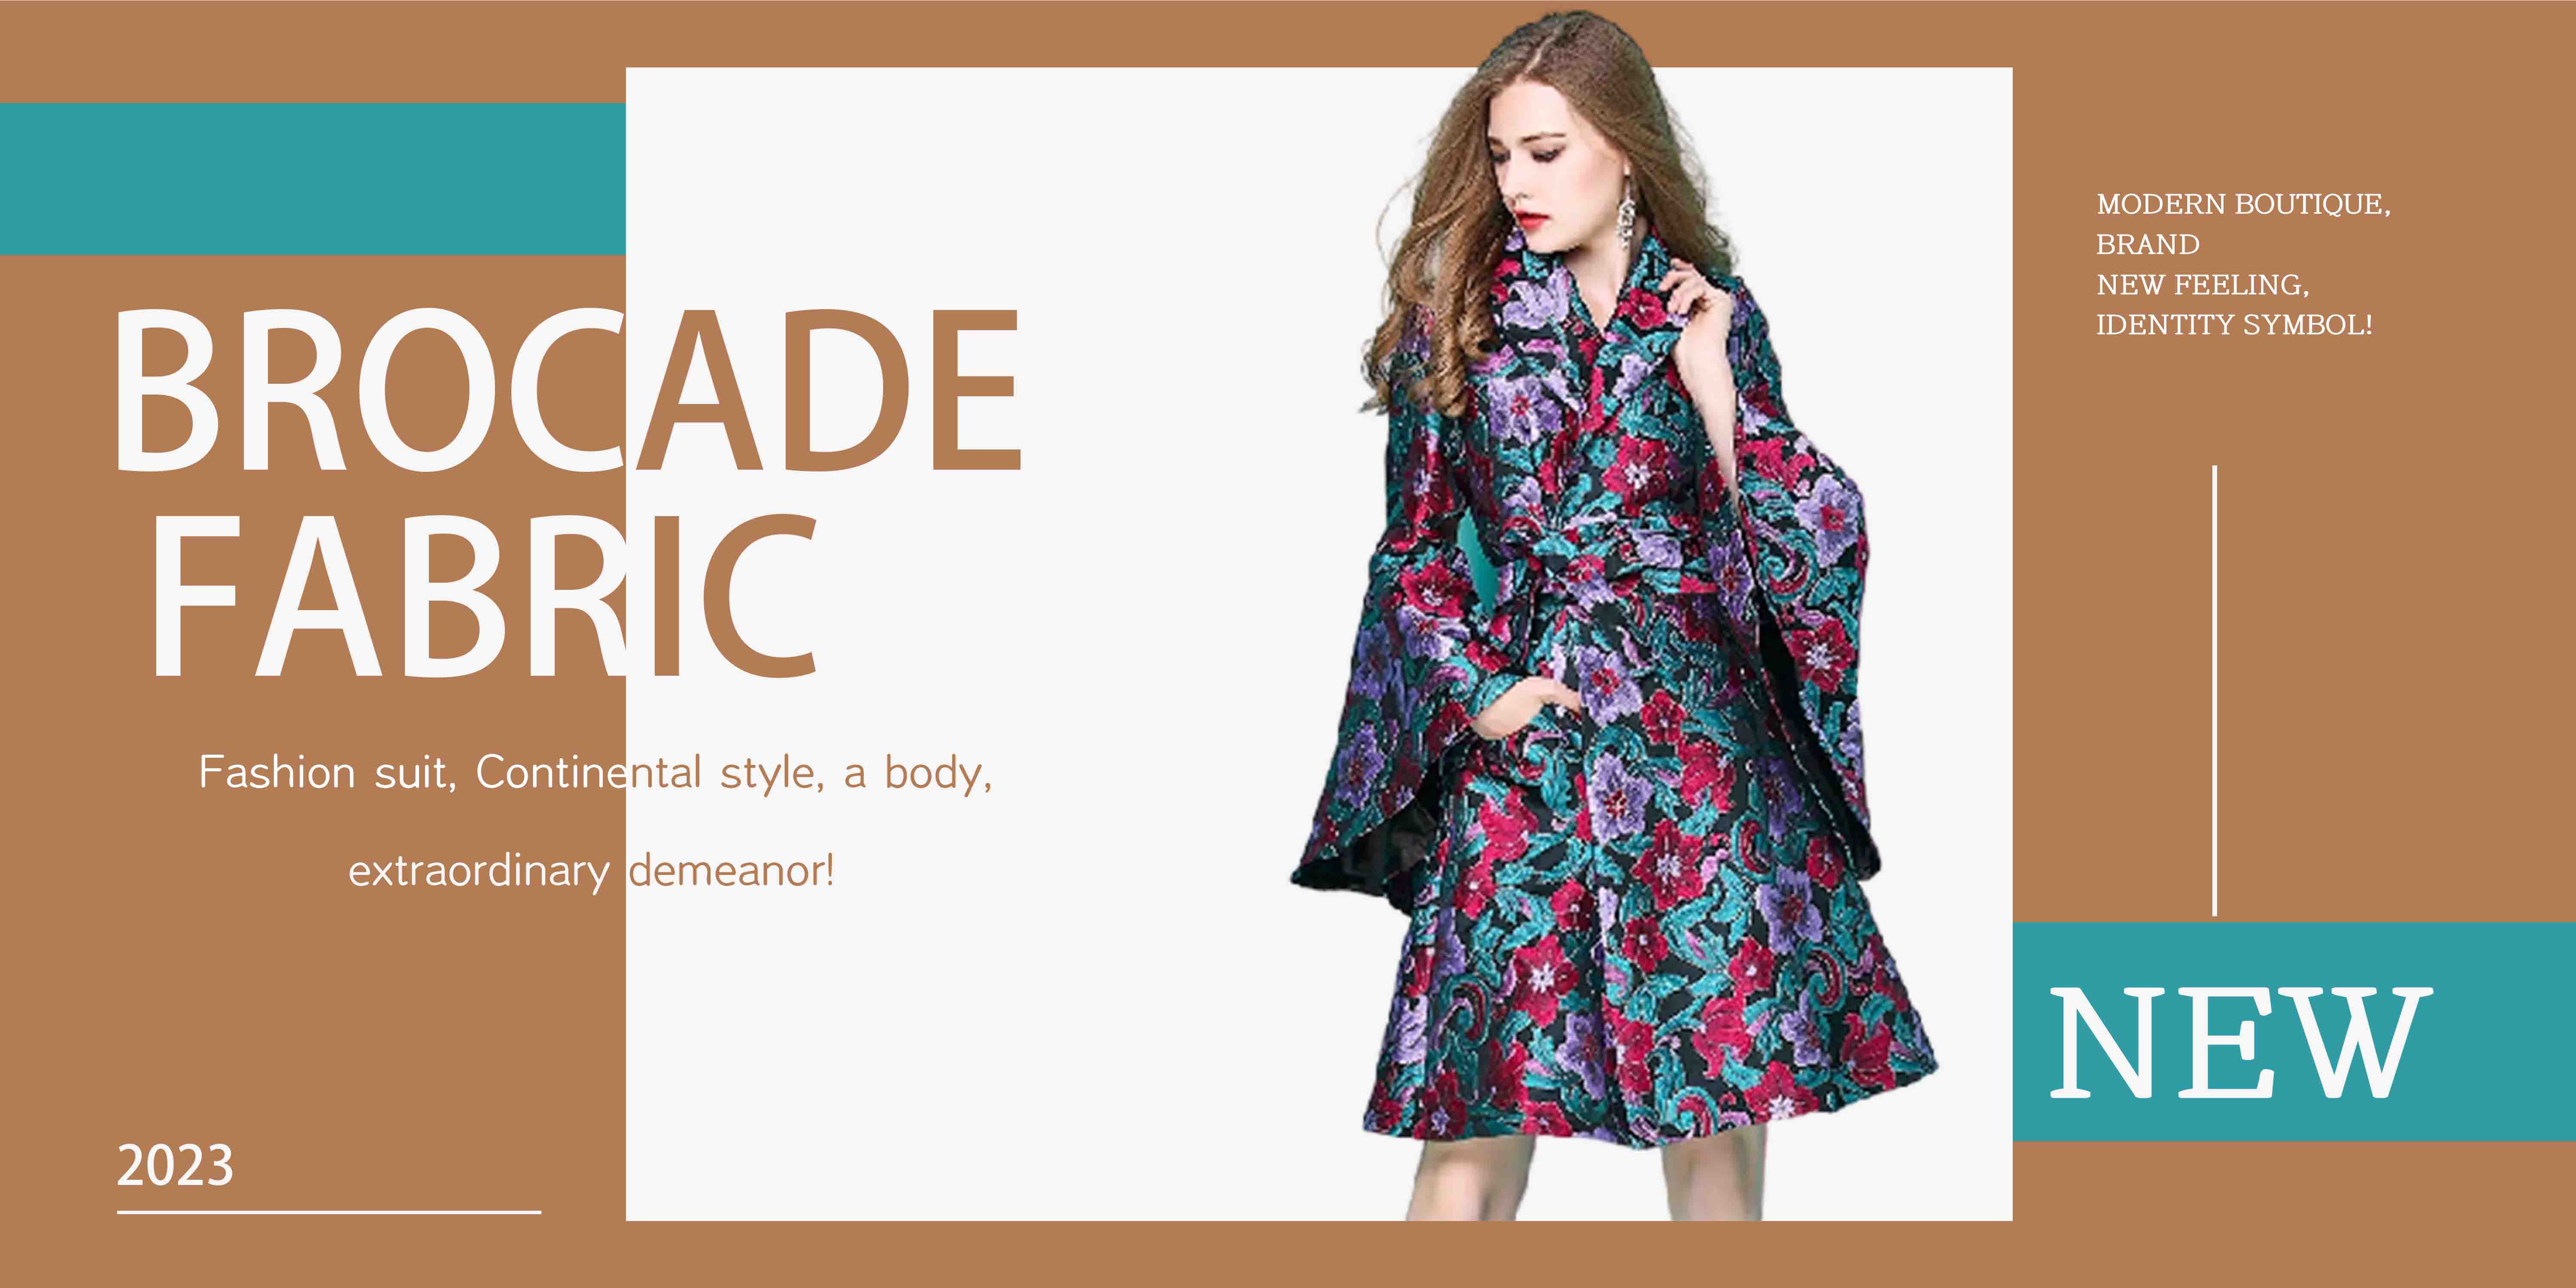 What Is Brocade Fabric ？